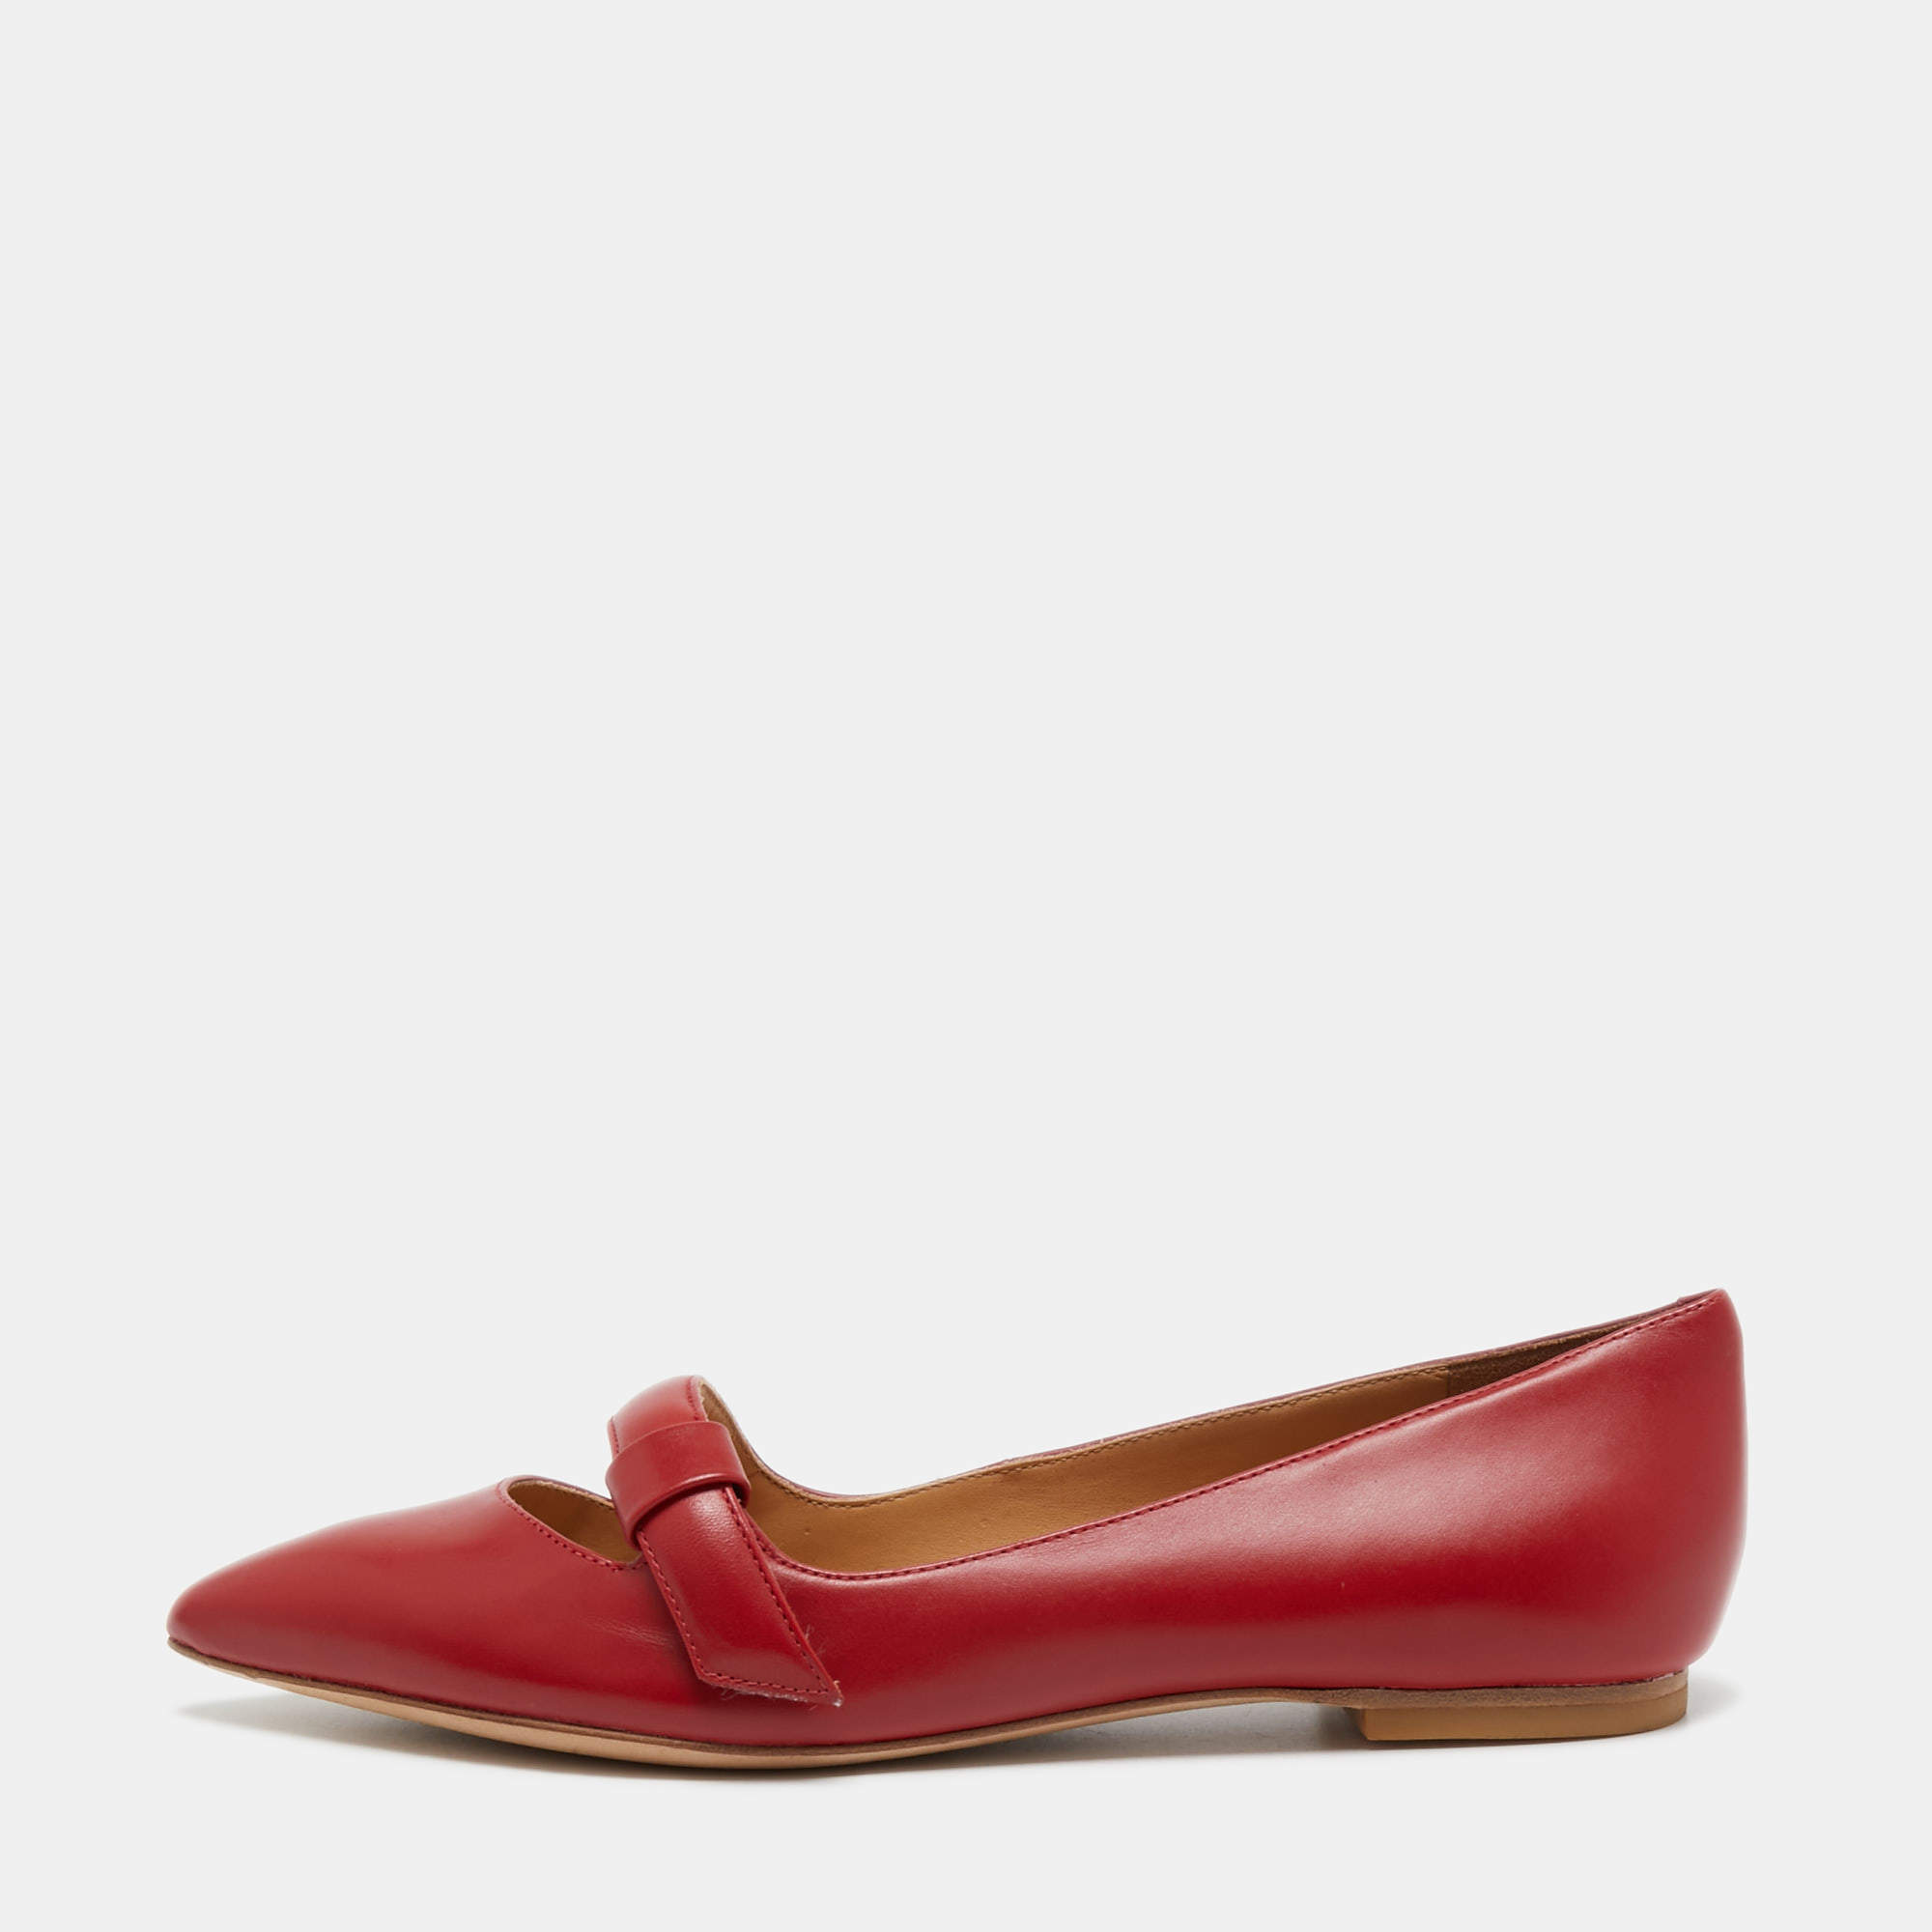 Marc by Marc Jacobs Red Leather Ballet Flats Size 36.5